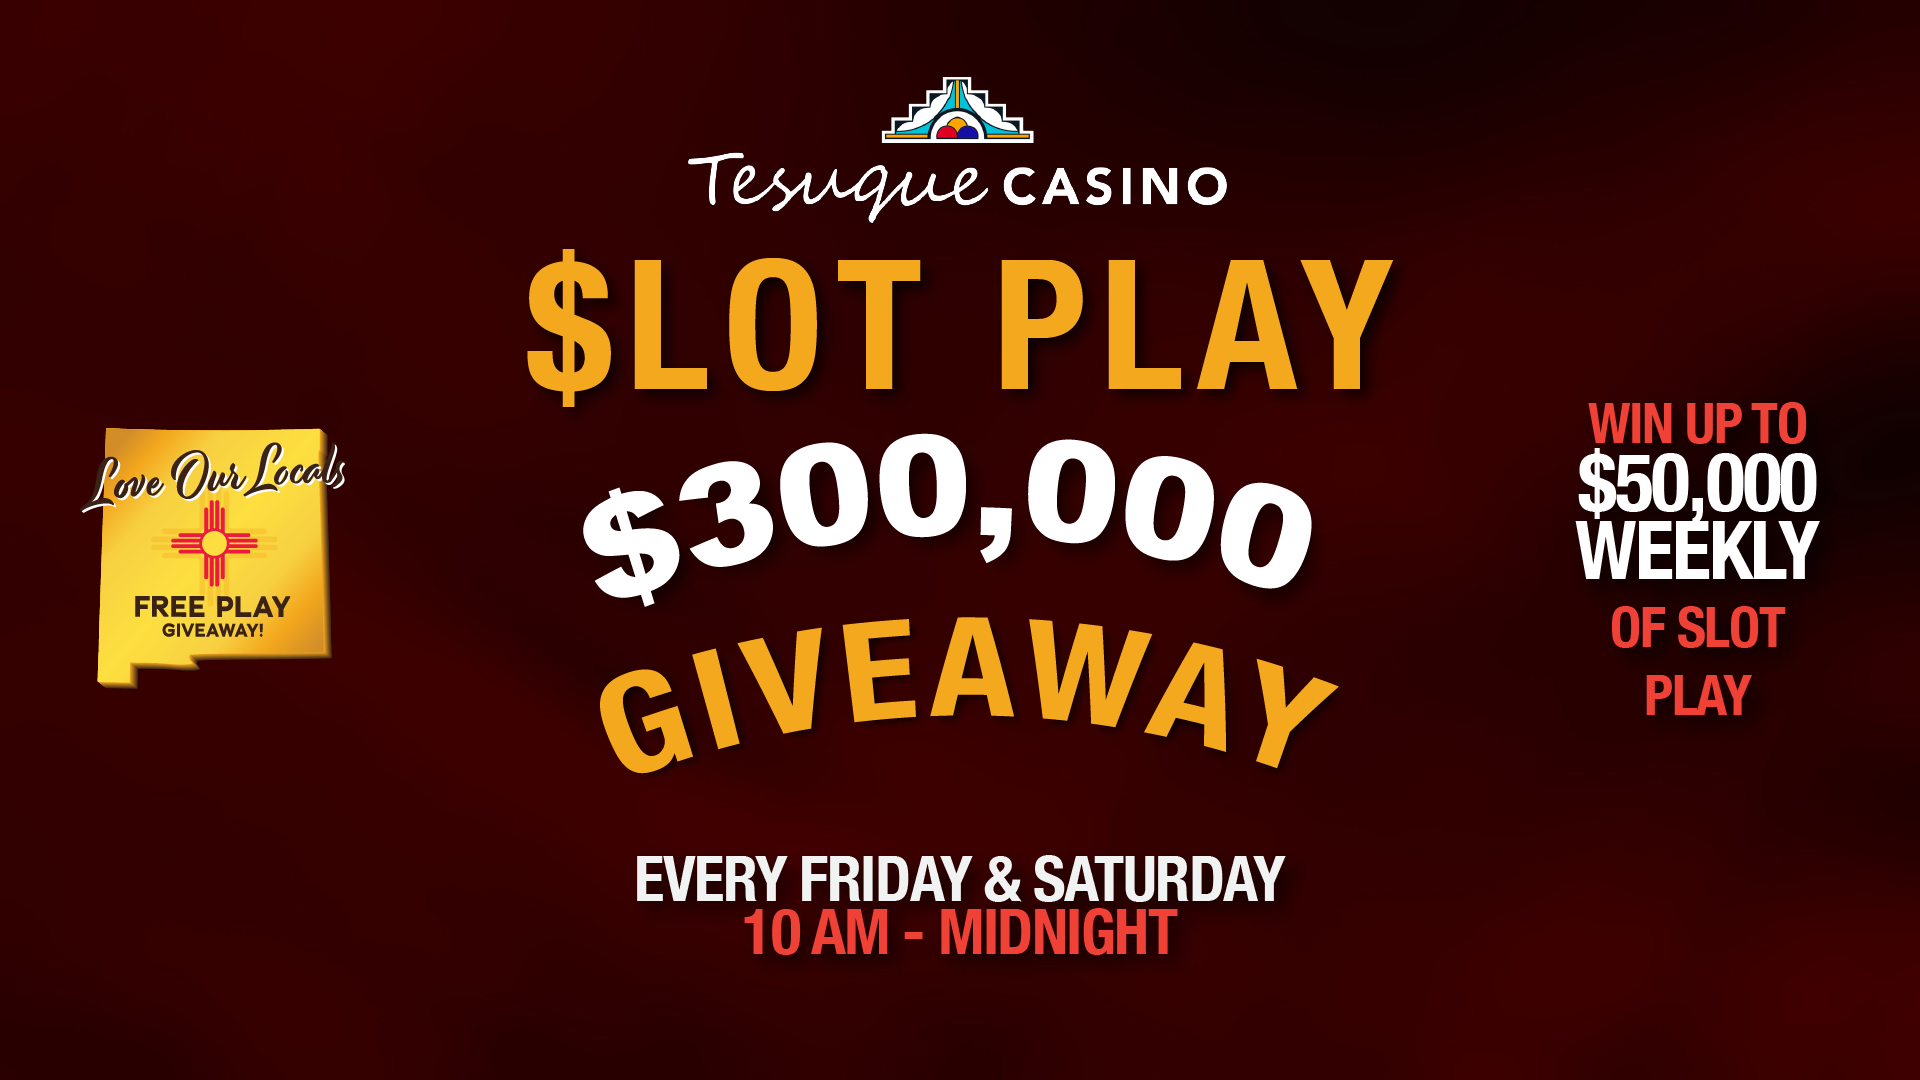 Slot Play $300,000 giveaway, every Friday & Saturday 10AM to midnight. Win uo to $50,000 weekly of slot play